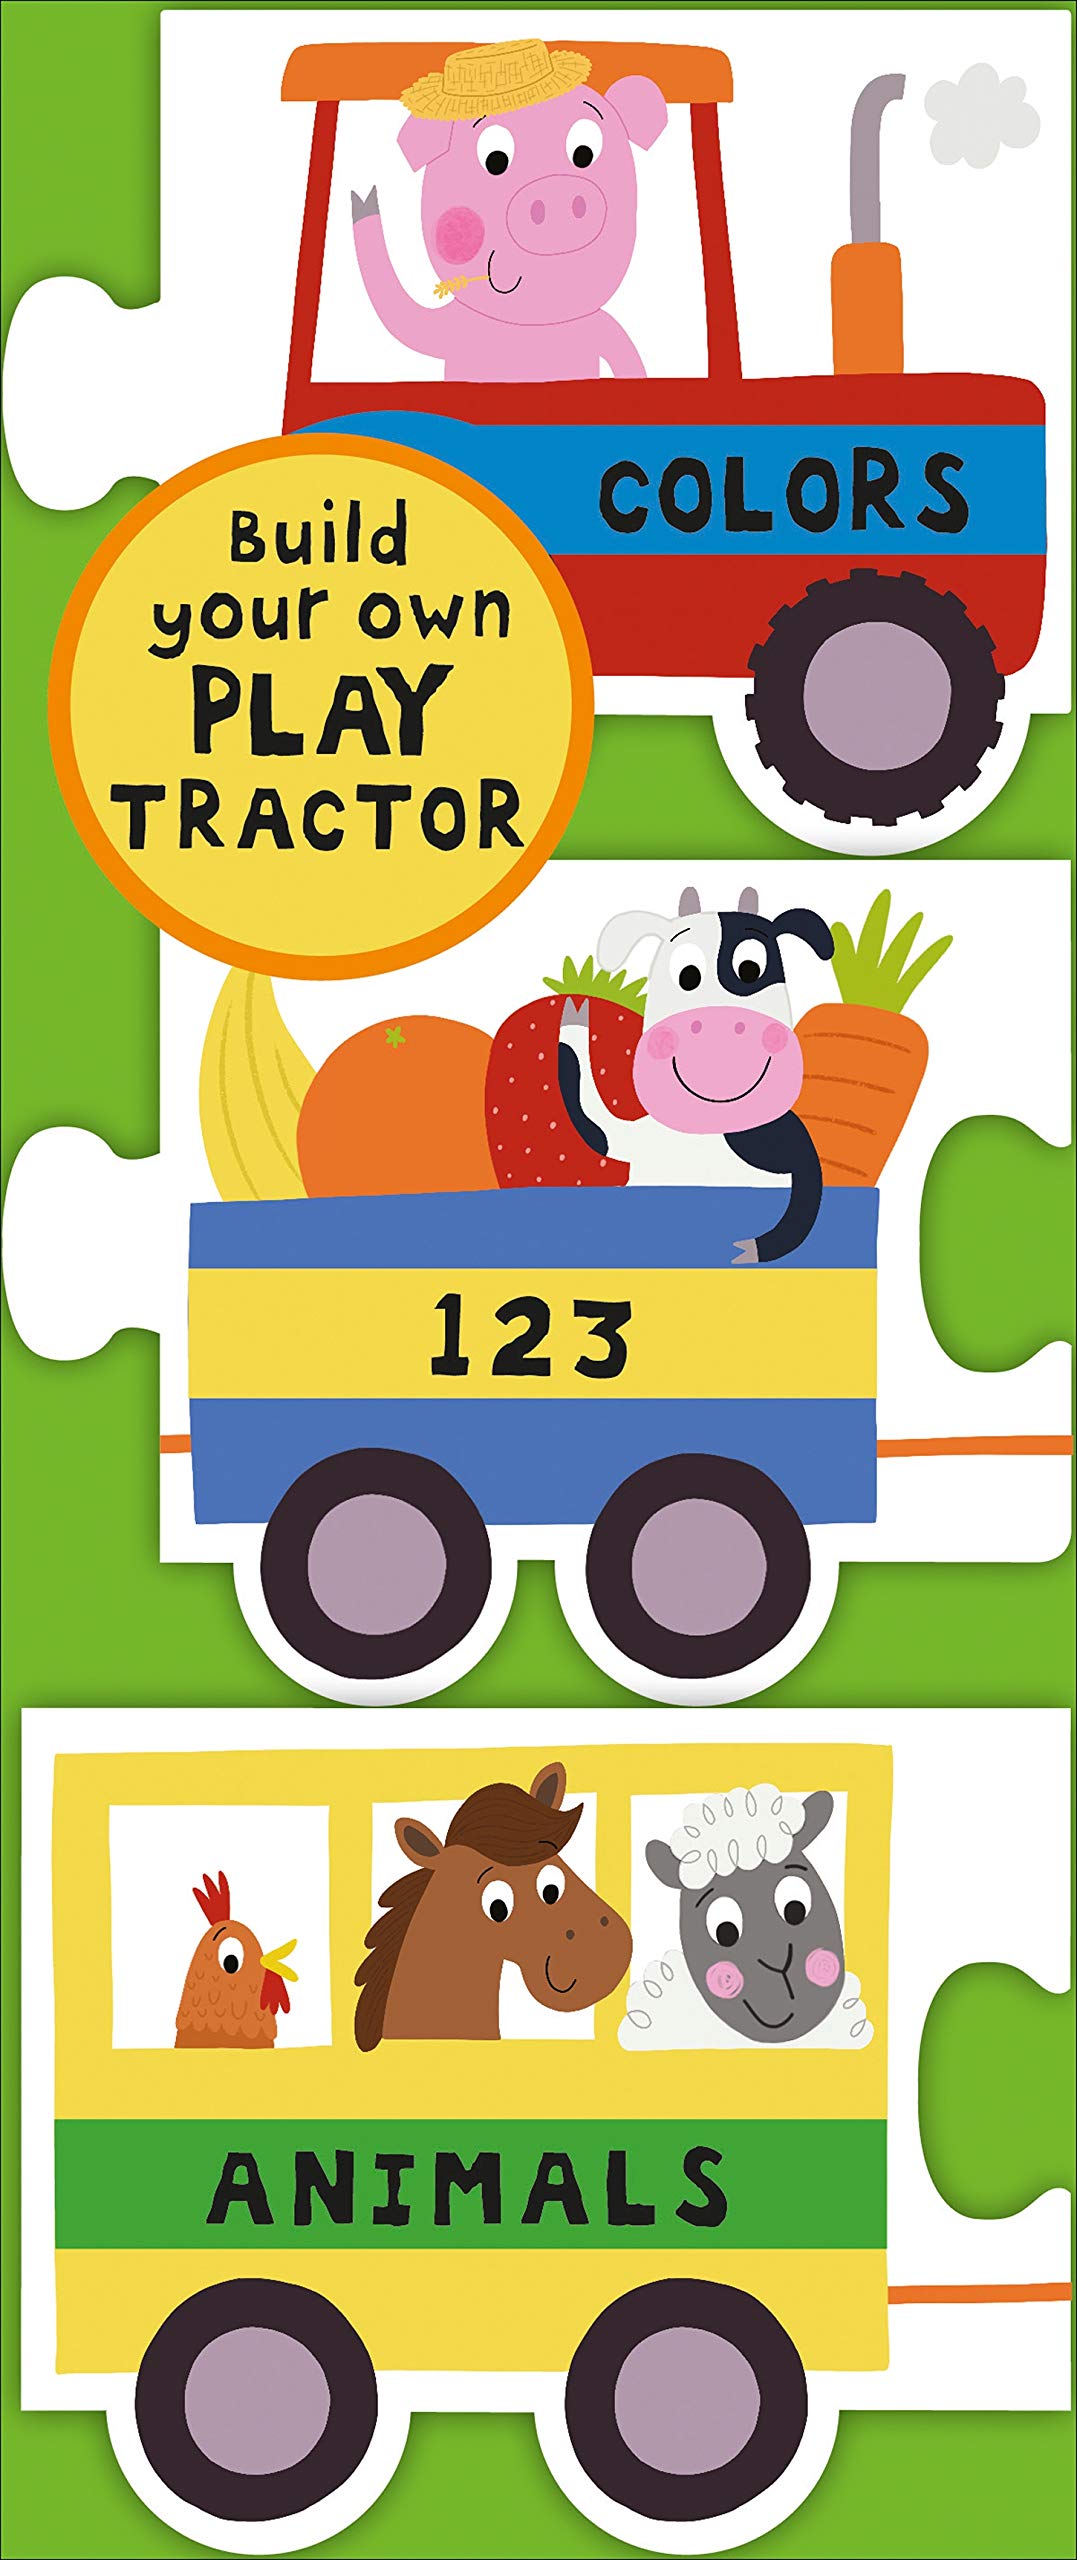 Play Tractor: Colors, 123, Animals